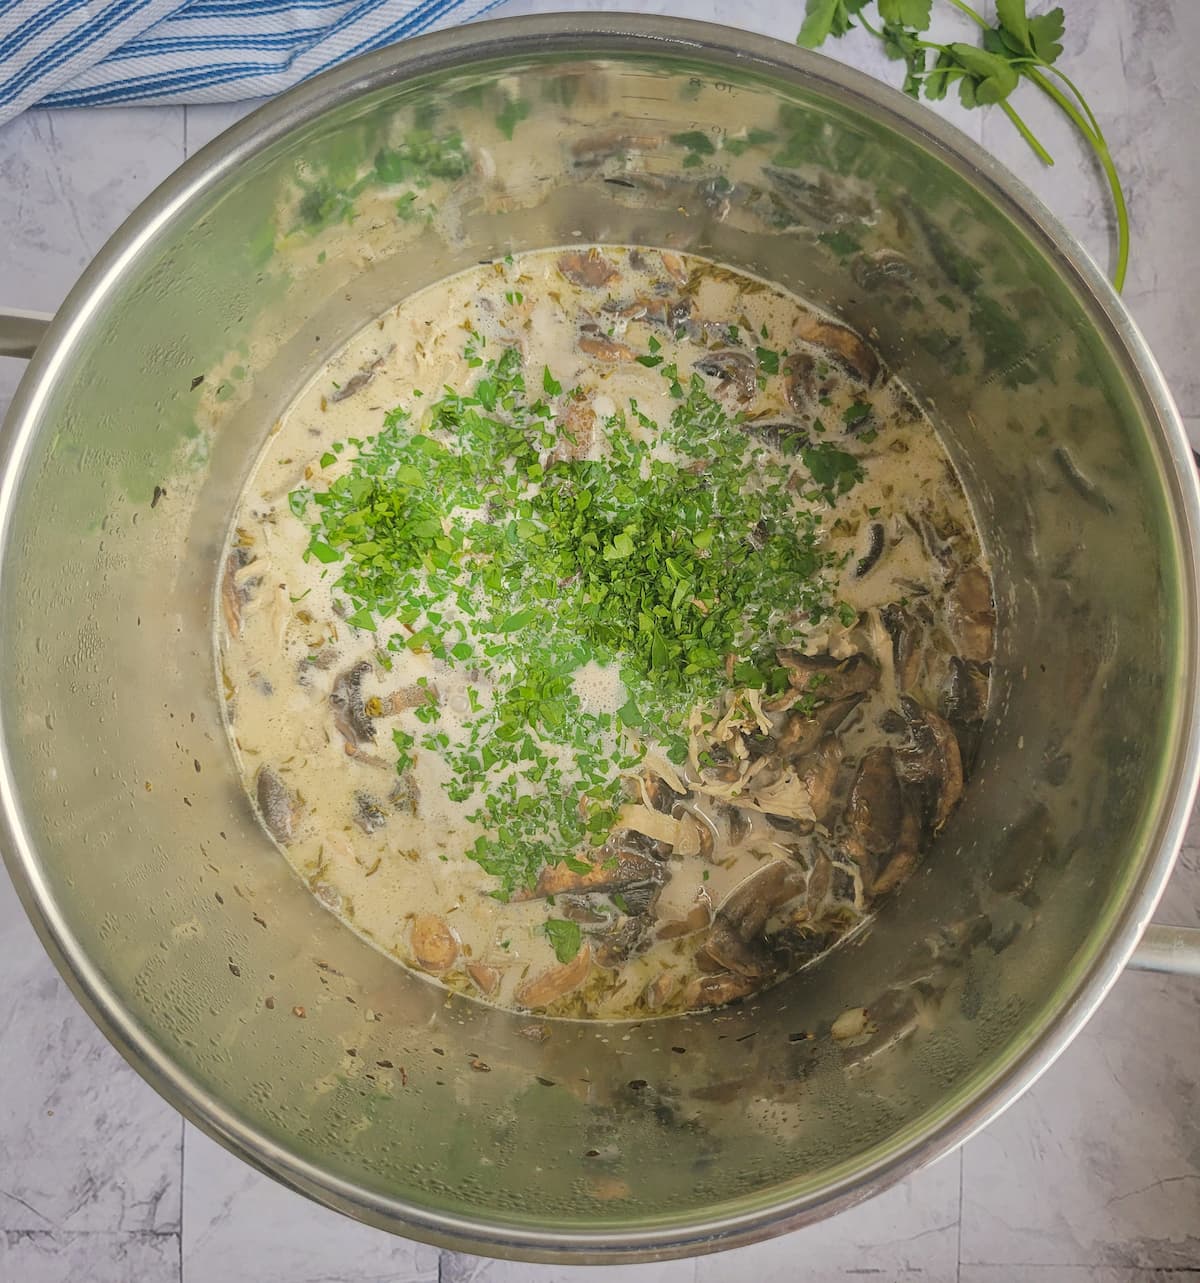 chopped parsley, heavy cream, sliced mushrooms and other ingredients in a large pot